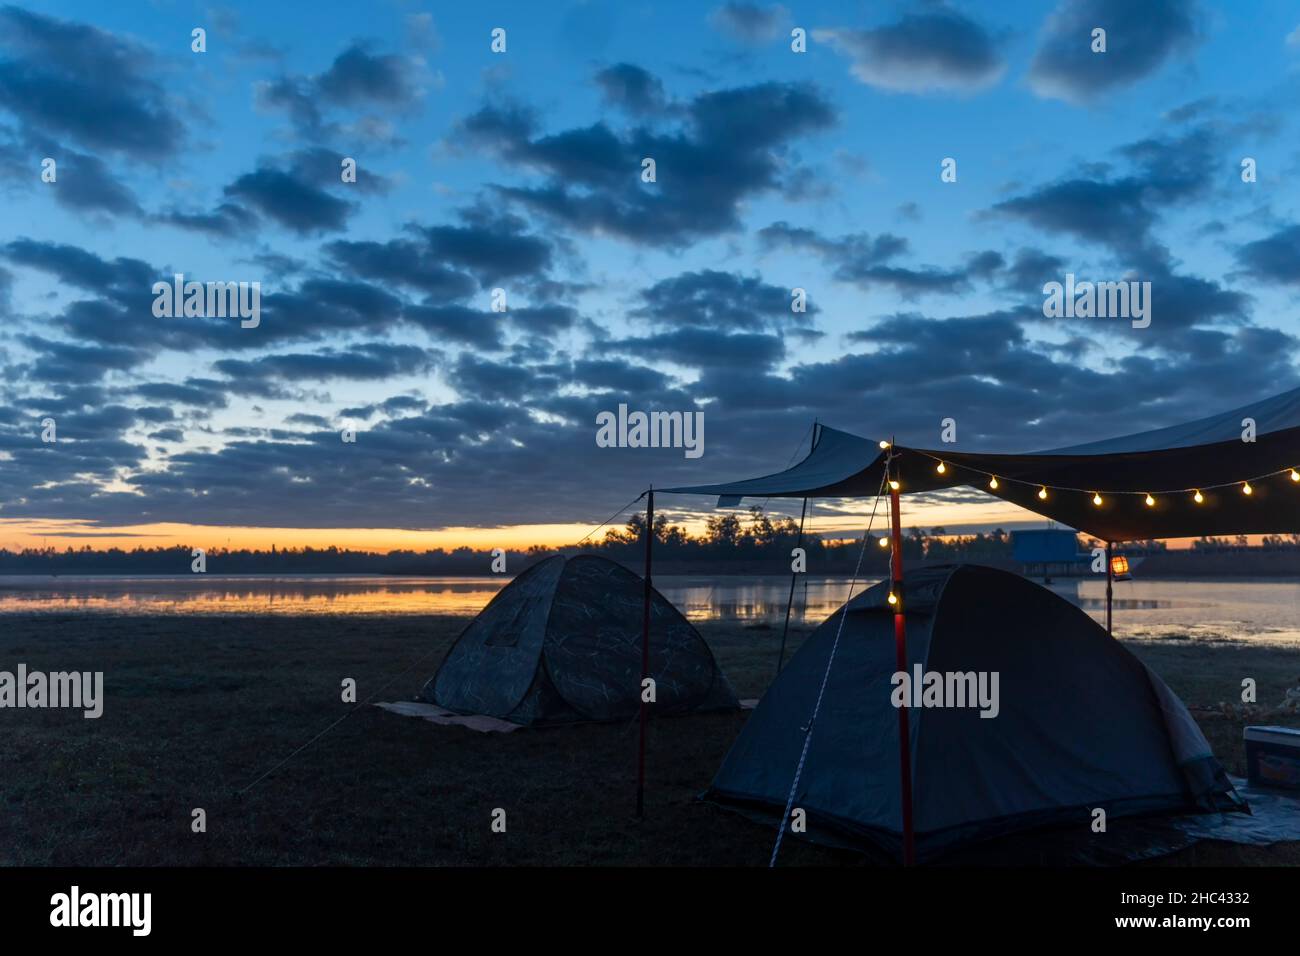 Tent camping in the morning sunrise at the lakeside Stock Photo